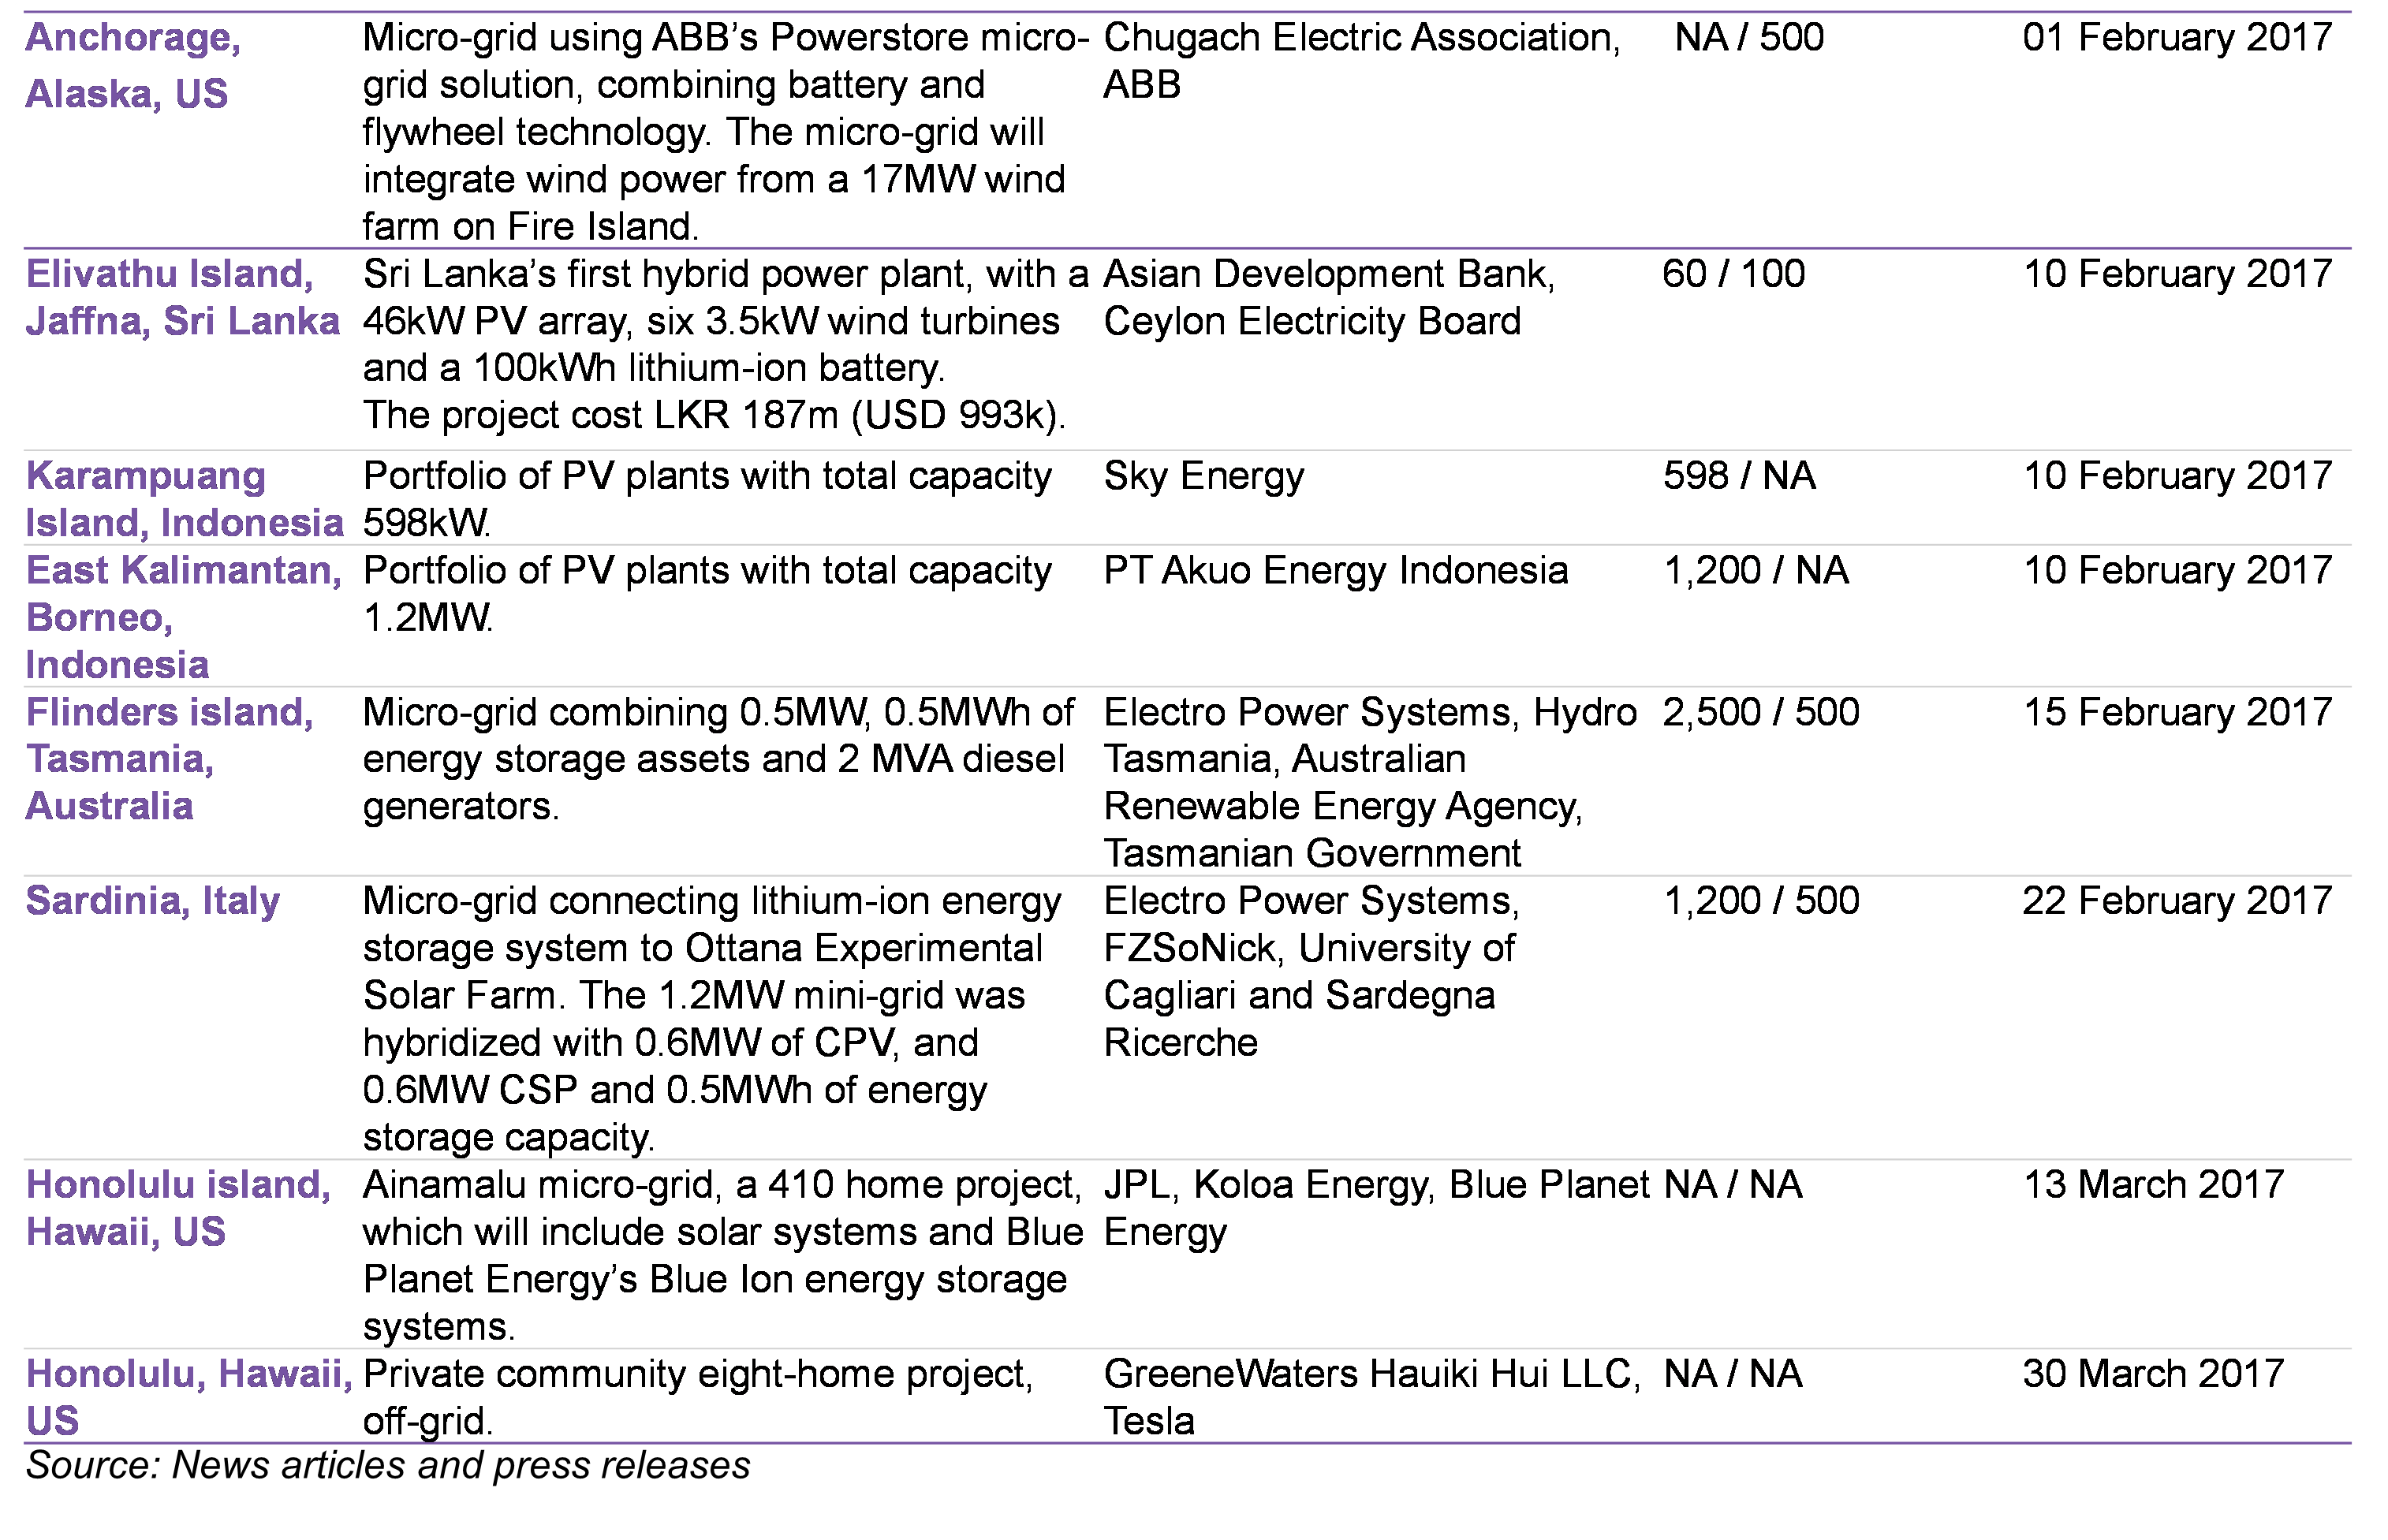 OG - table2b - Island projects announced in 4Q 2016